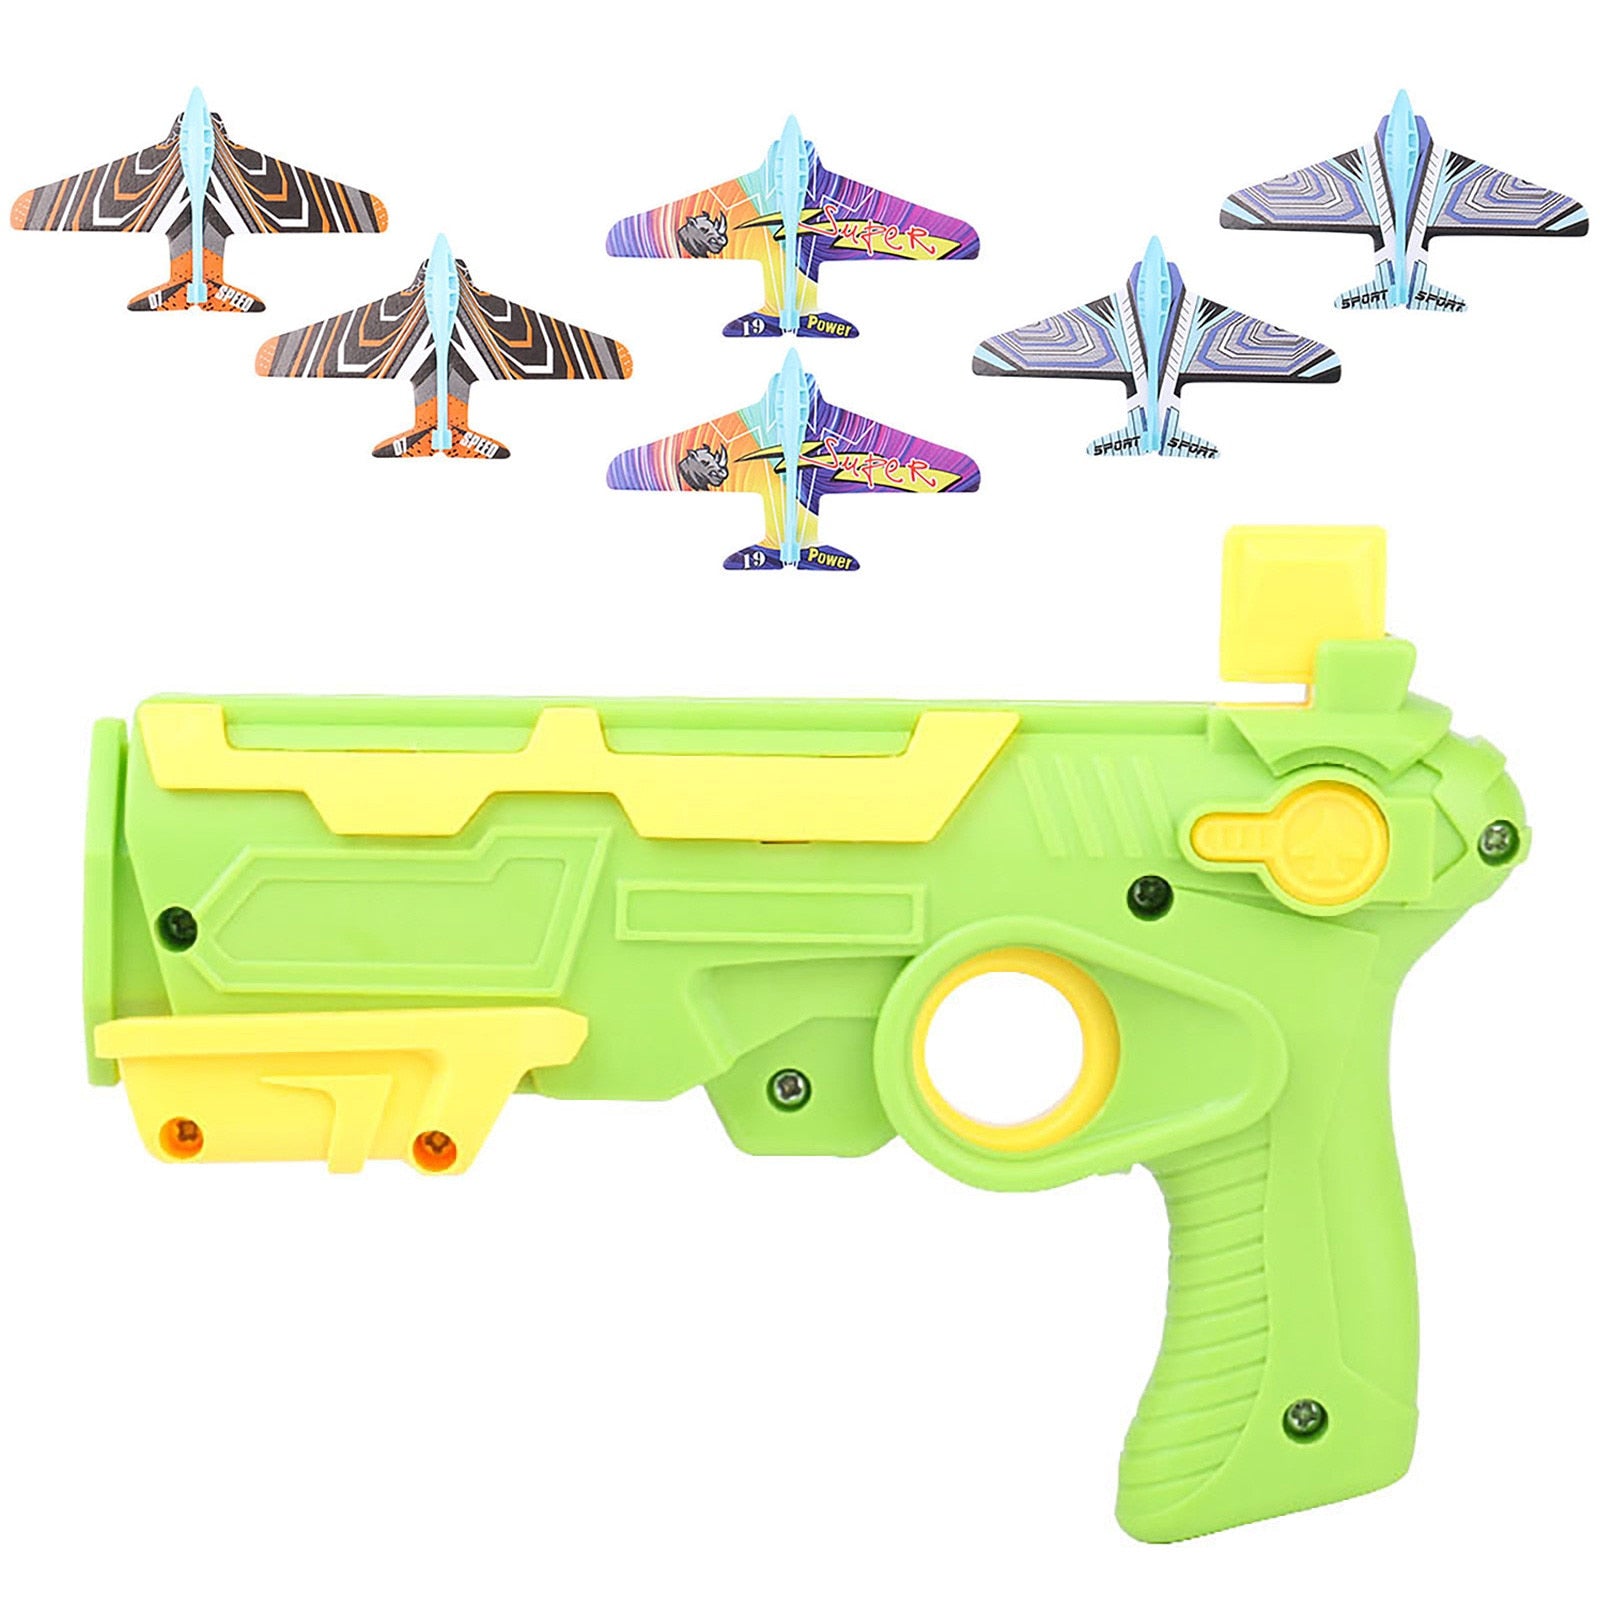 Airplane Launcher Toy Catapult Gun Toy With 6 Small Plane One-Click Ejection Shooting Gun Airplane Toys for Kids Boy Gift Airplane Launcher Bubble Catapult With 6 Small Plane Toy for children kids boy DailyAlertDeals China Green 